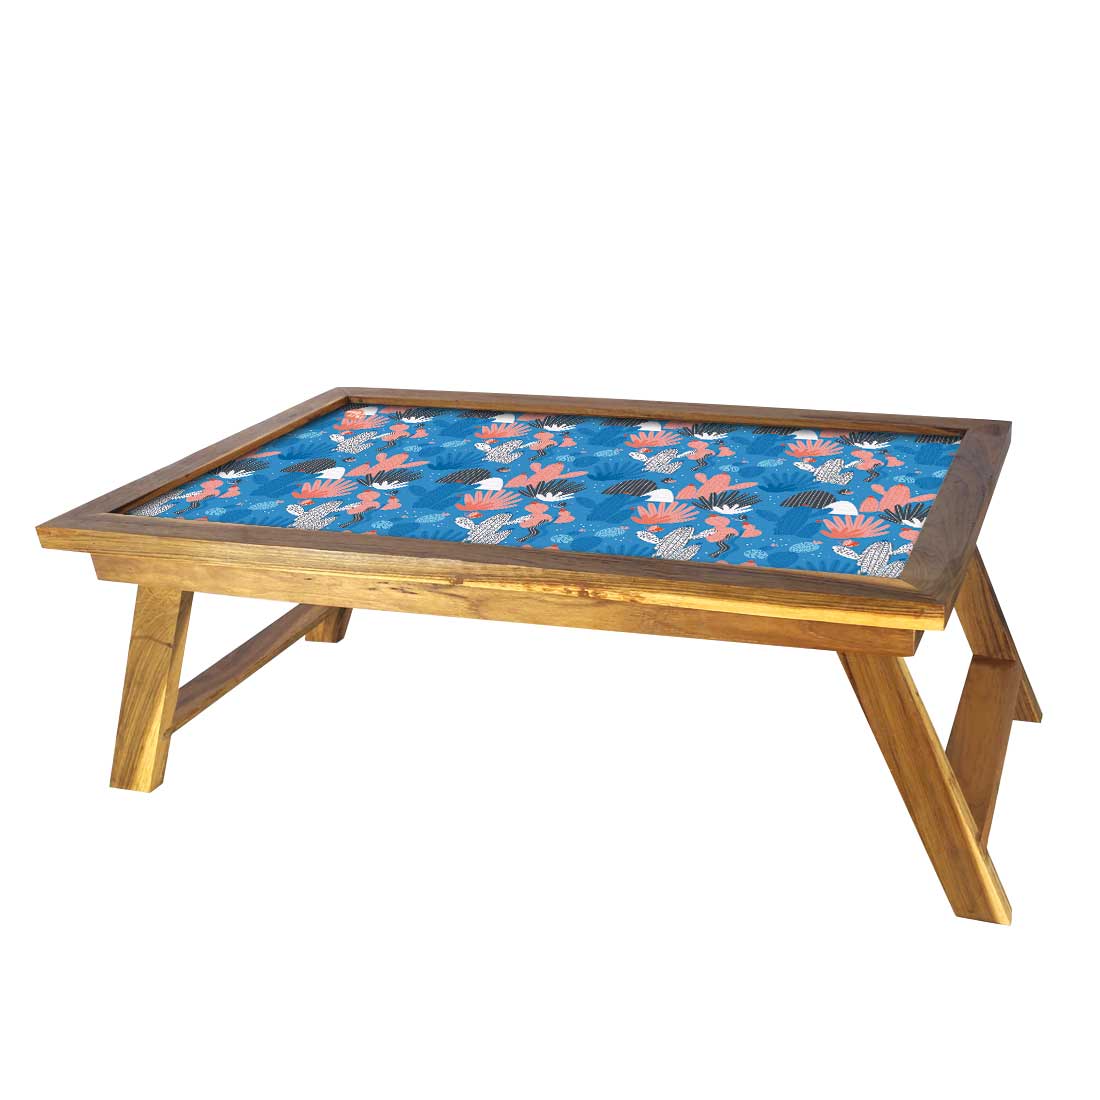 Modern Folding Printed Breakfast Bed Tray Table With Legs - Pink Cactus Nutcase